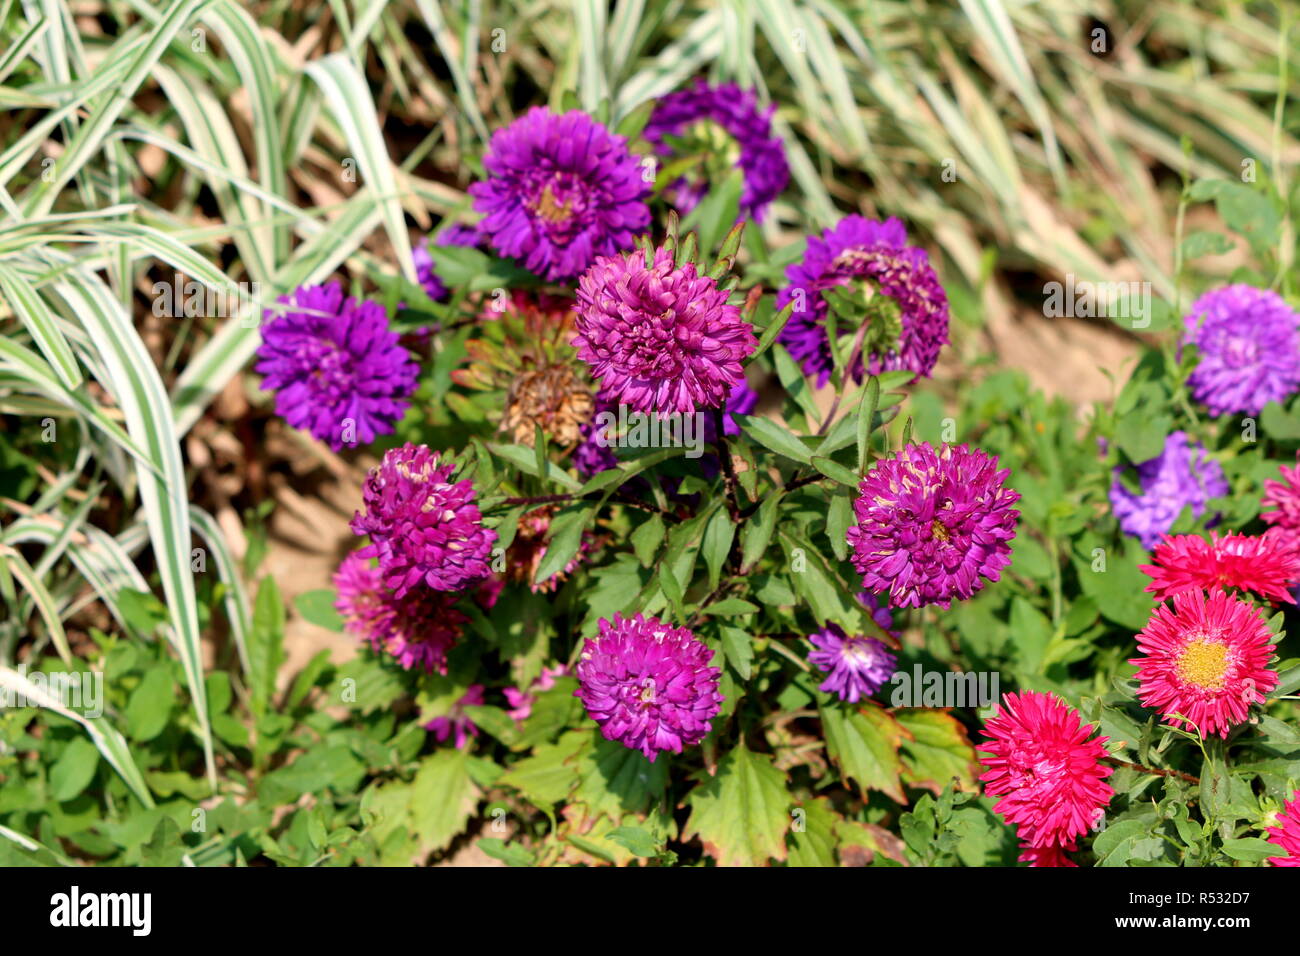 China aster or Callistephus chinensis or Annual aster monotypic genus of flowering plant planted in local garden with various dense shades of purple Stock Photo